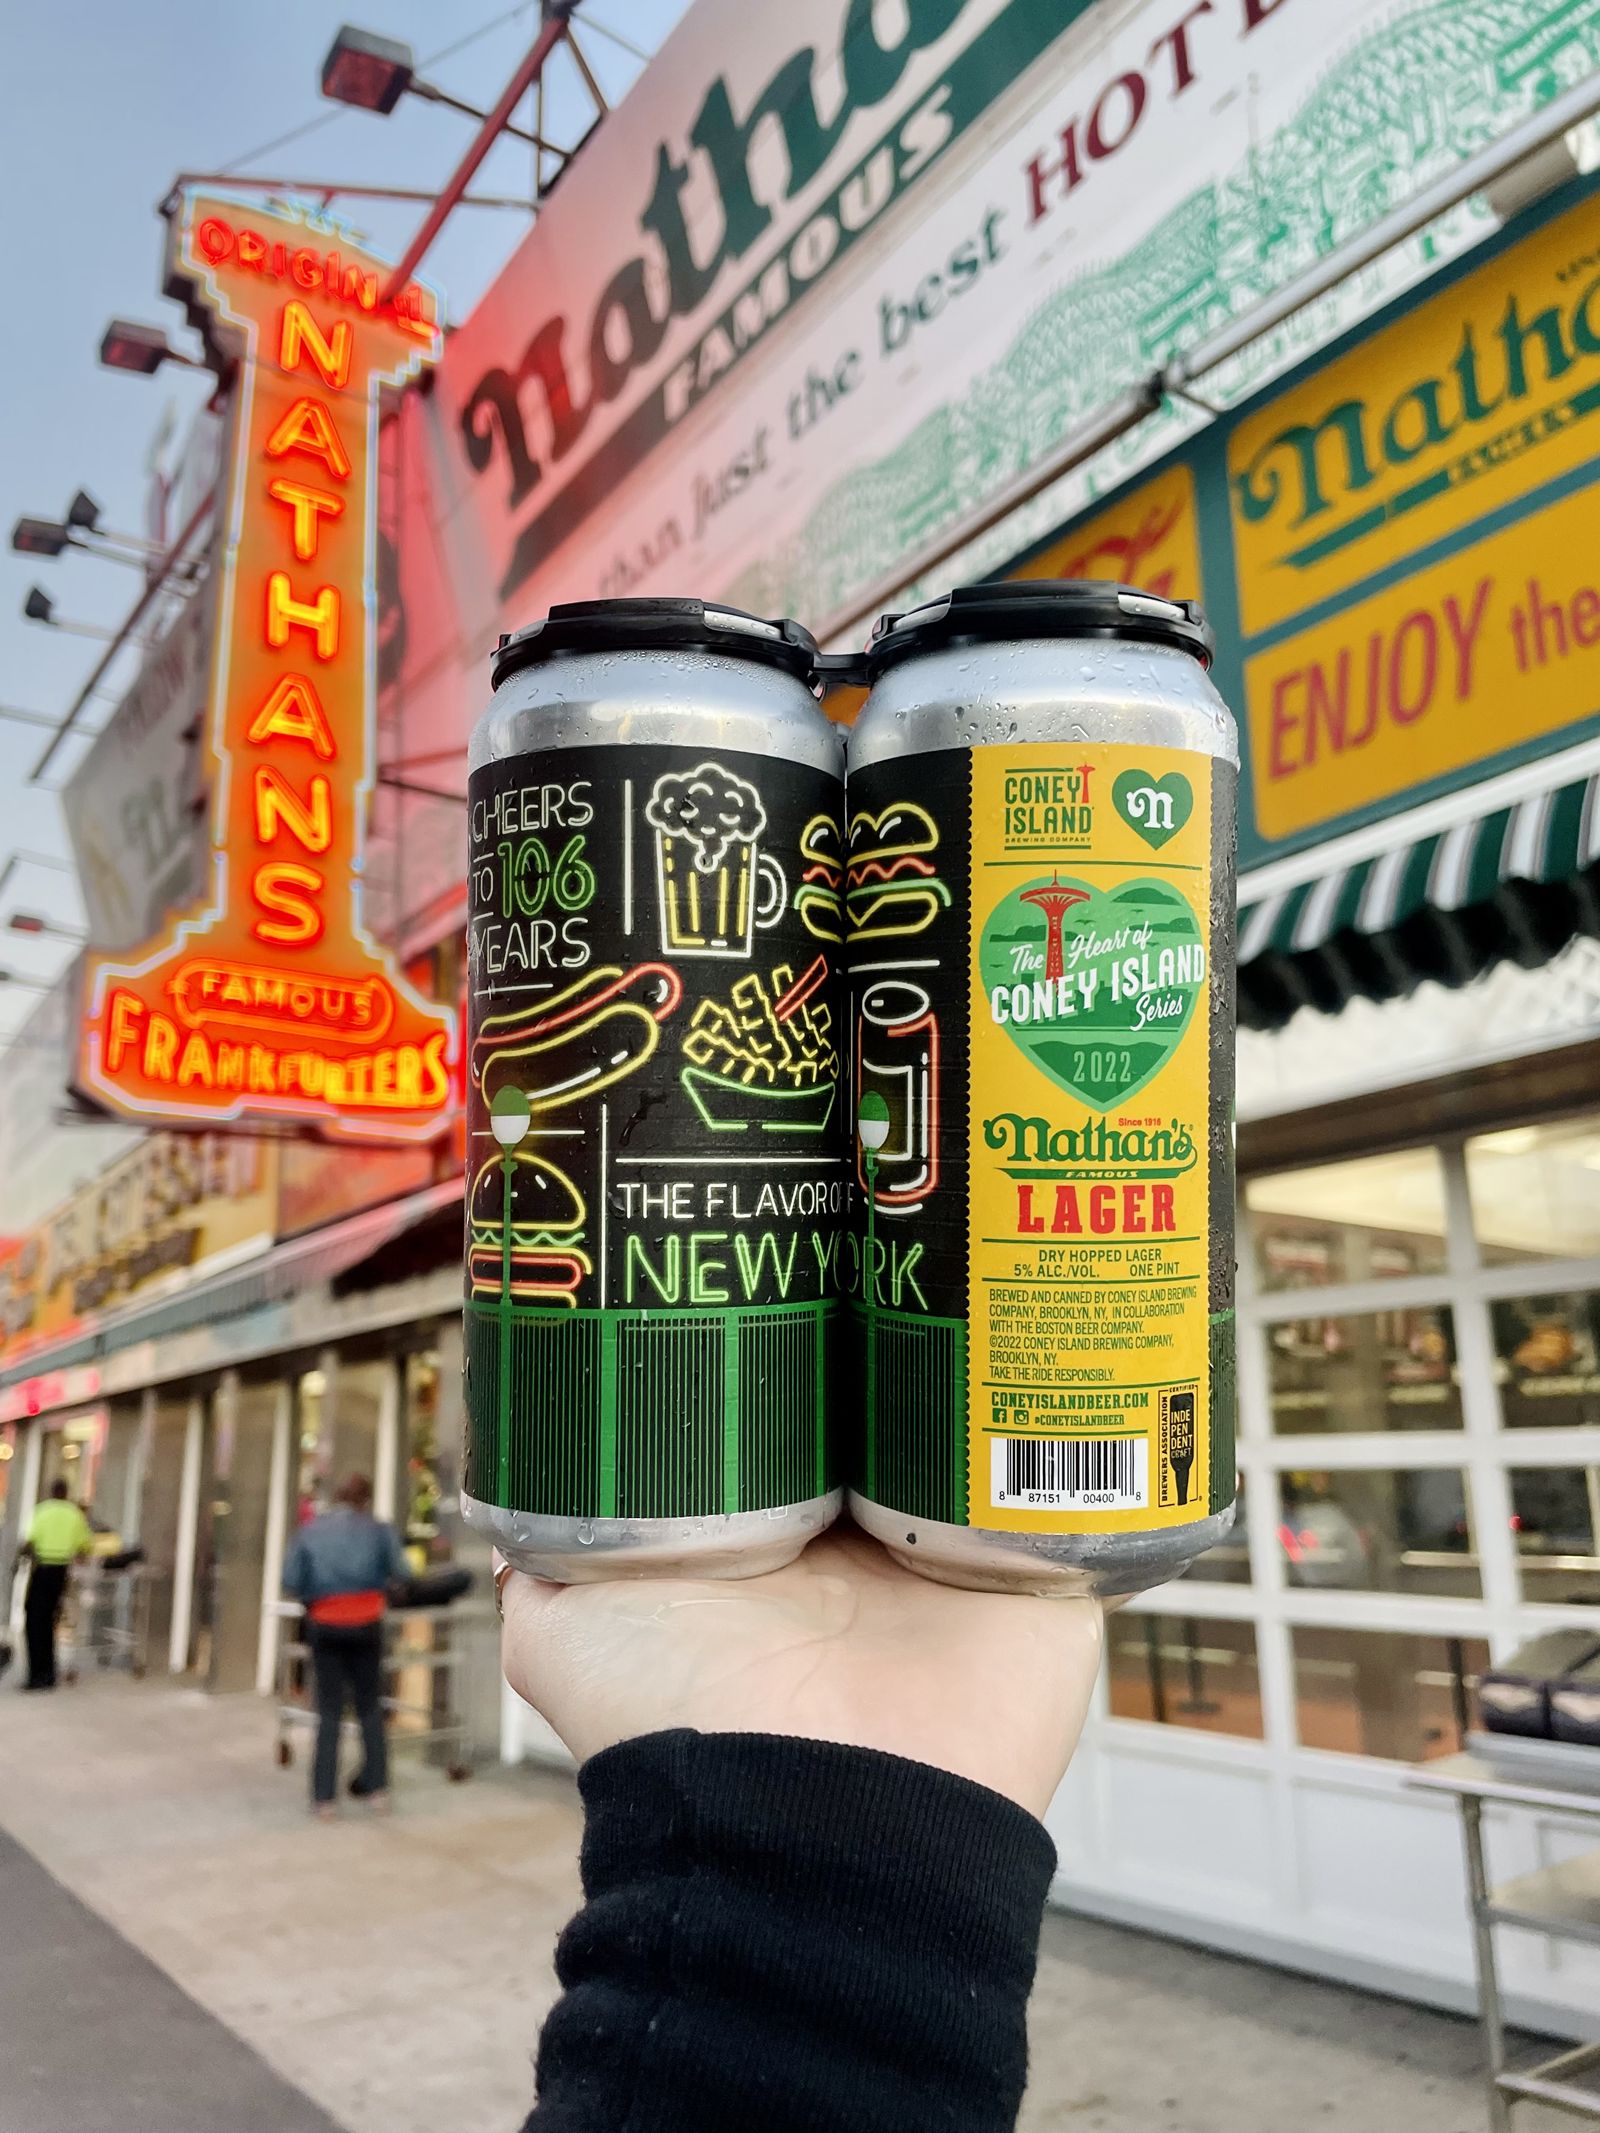 Nathan's Famous Launches Limited Time Lager in Collaboration With Coney Island Brewing Company